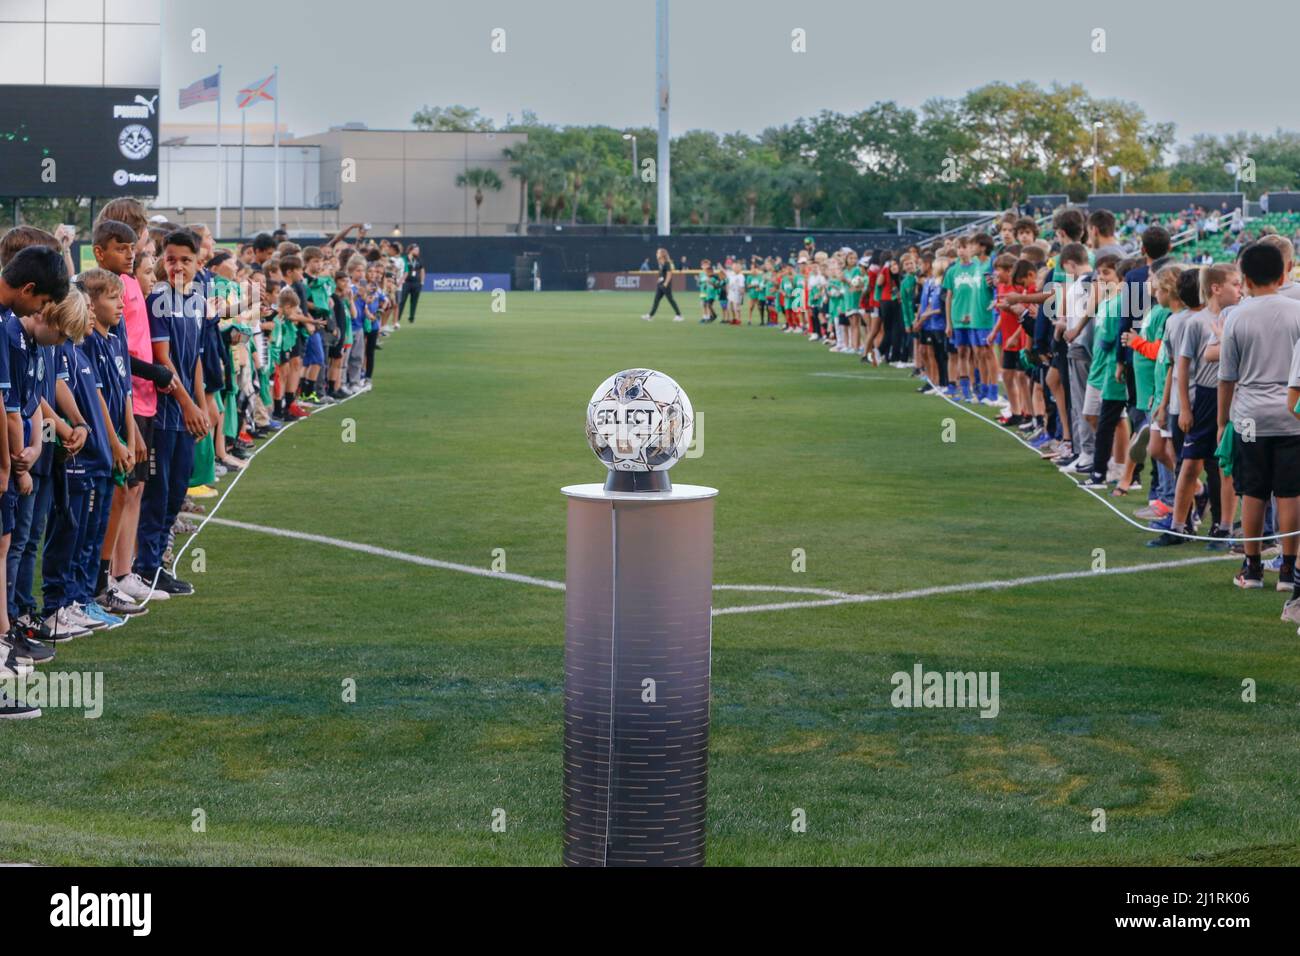 St. Petersburg, FL USA: The entrance of the pitch had youth soccer teams and the game ball during a USL soccer game between the Tampa Bay Rowdies and Stock Photo